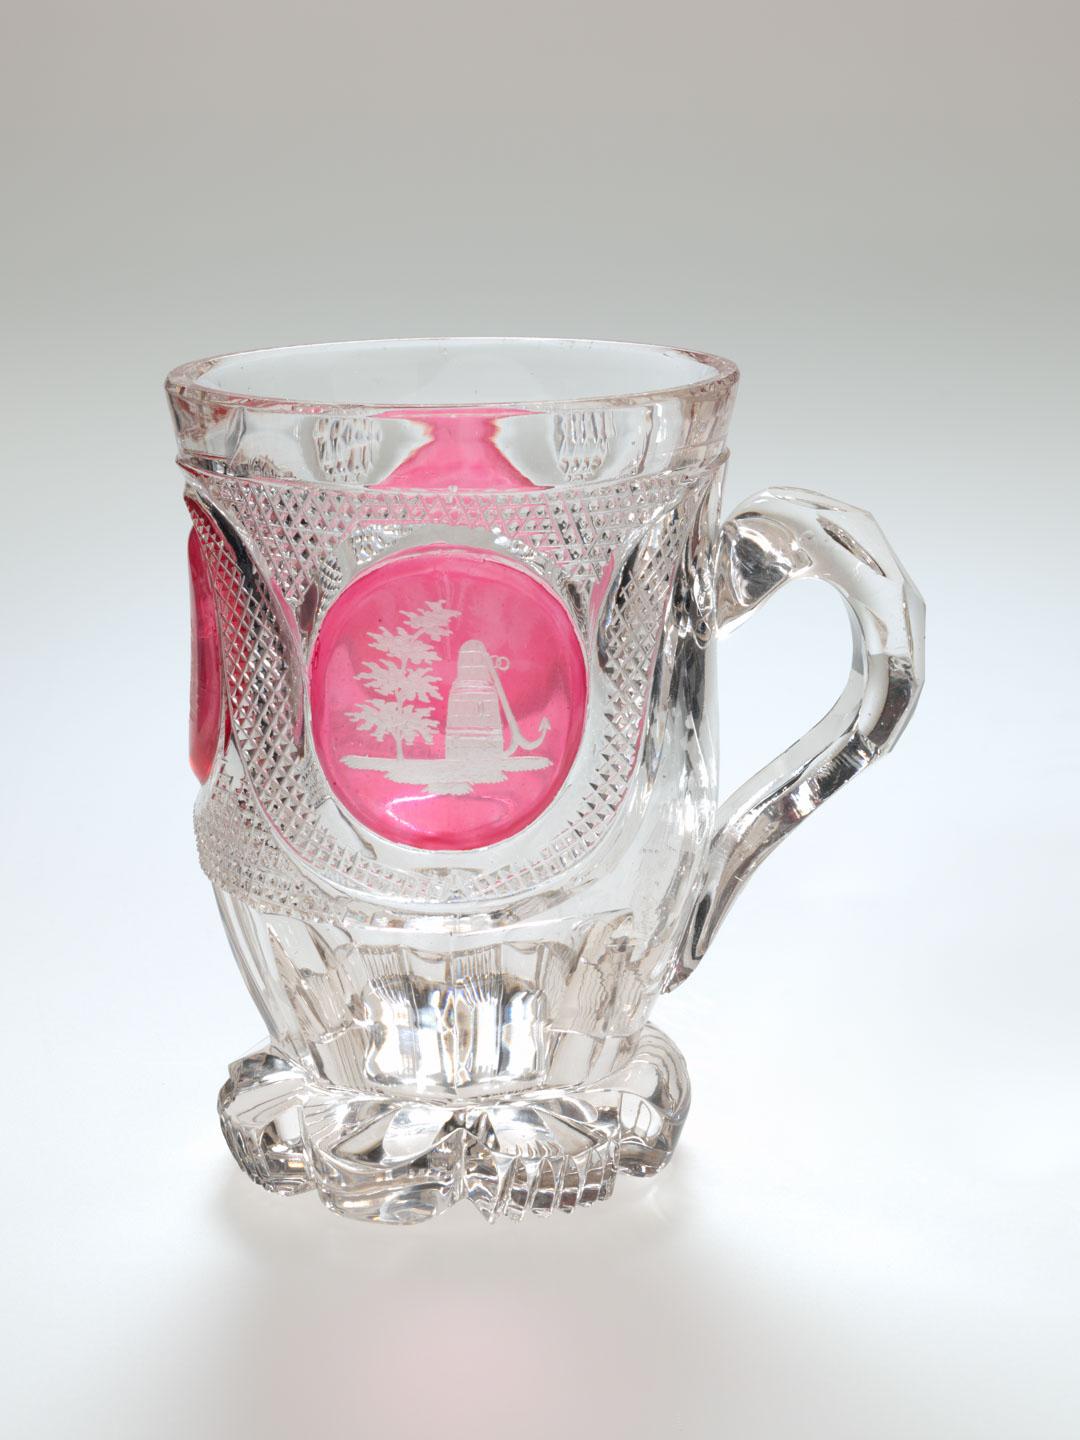 Artwork Mug this artwork made of Clear glass stained pink and engraved with a series of monuments, created in 1840-01-01